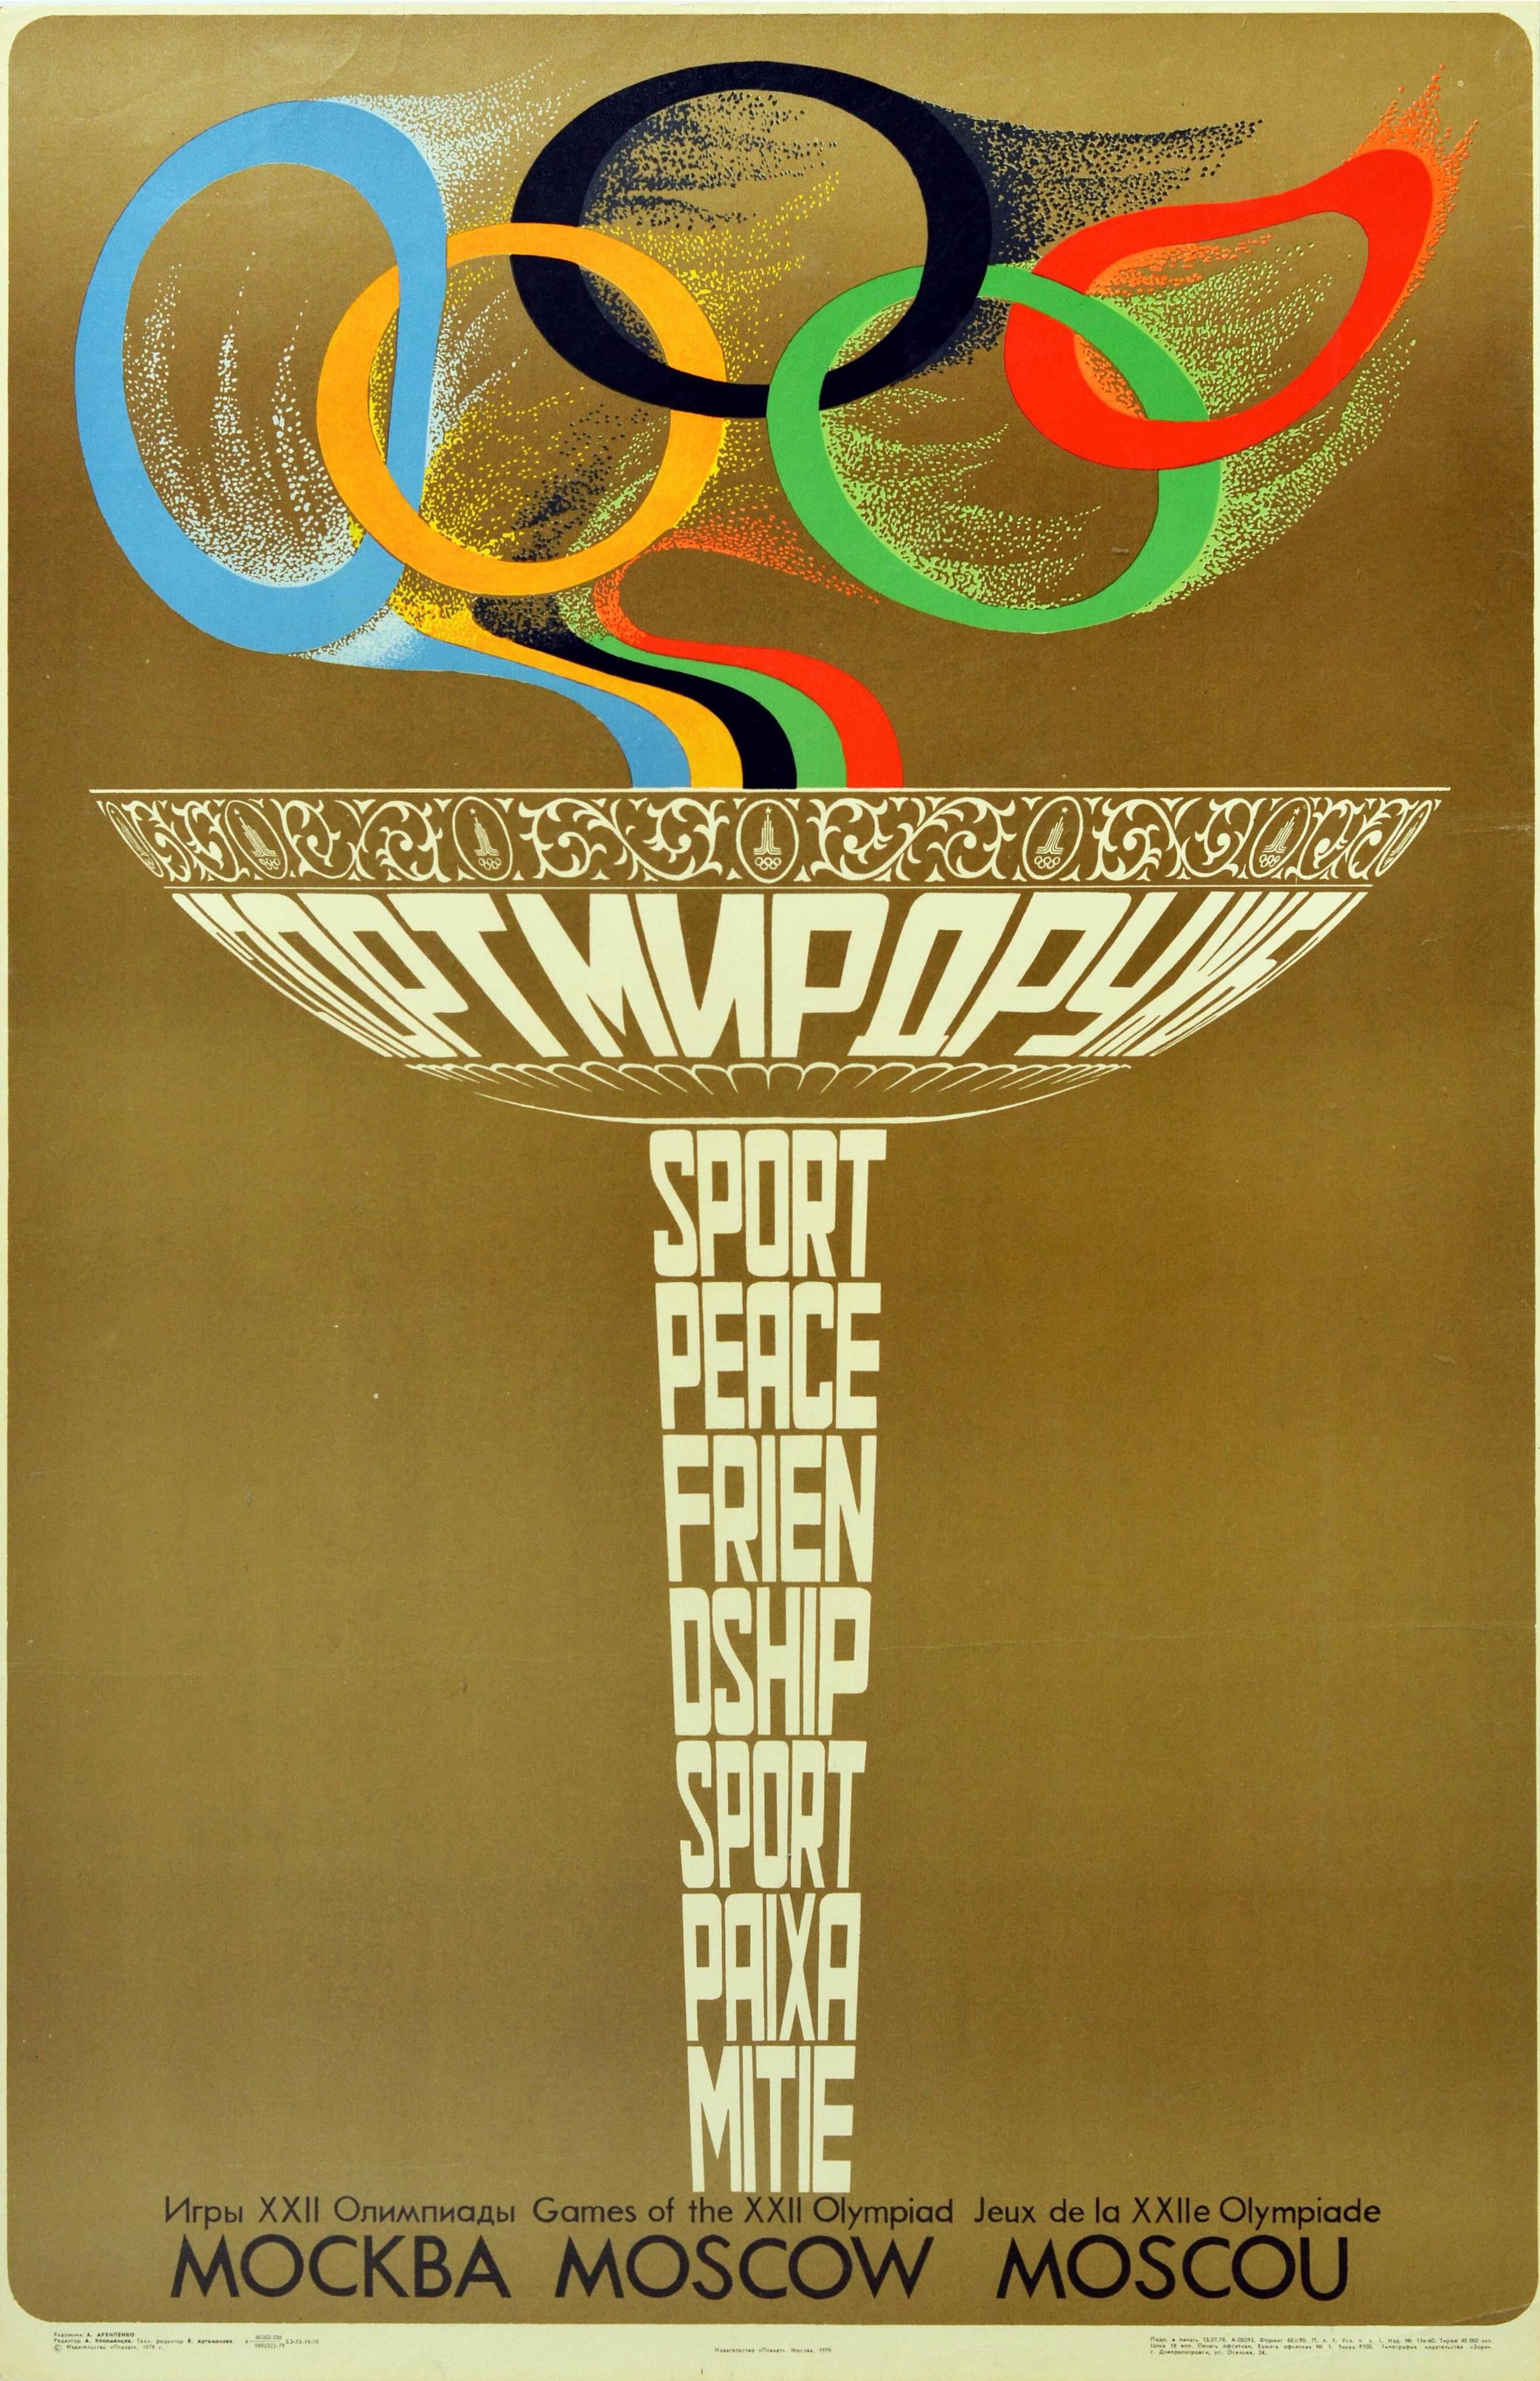 Original vintage Soviet sports poster for the 22nd Summer Olympic Games / Games of the XXII Olympiad in 1980 held in Moscow Russia featuring a great illustration of the Olympic torch with the Olympic rings forming a colourful flame and the words